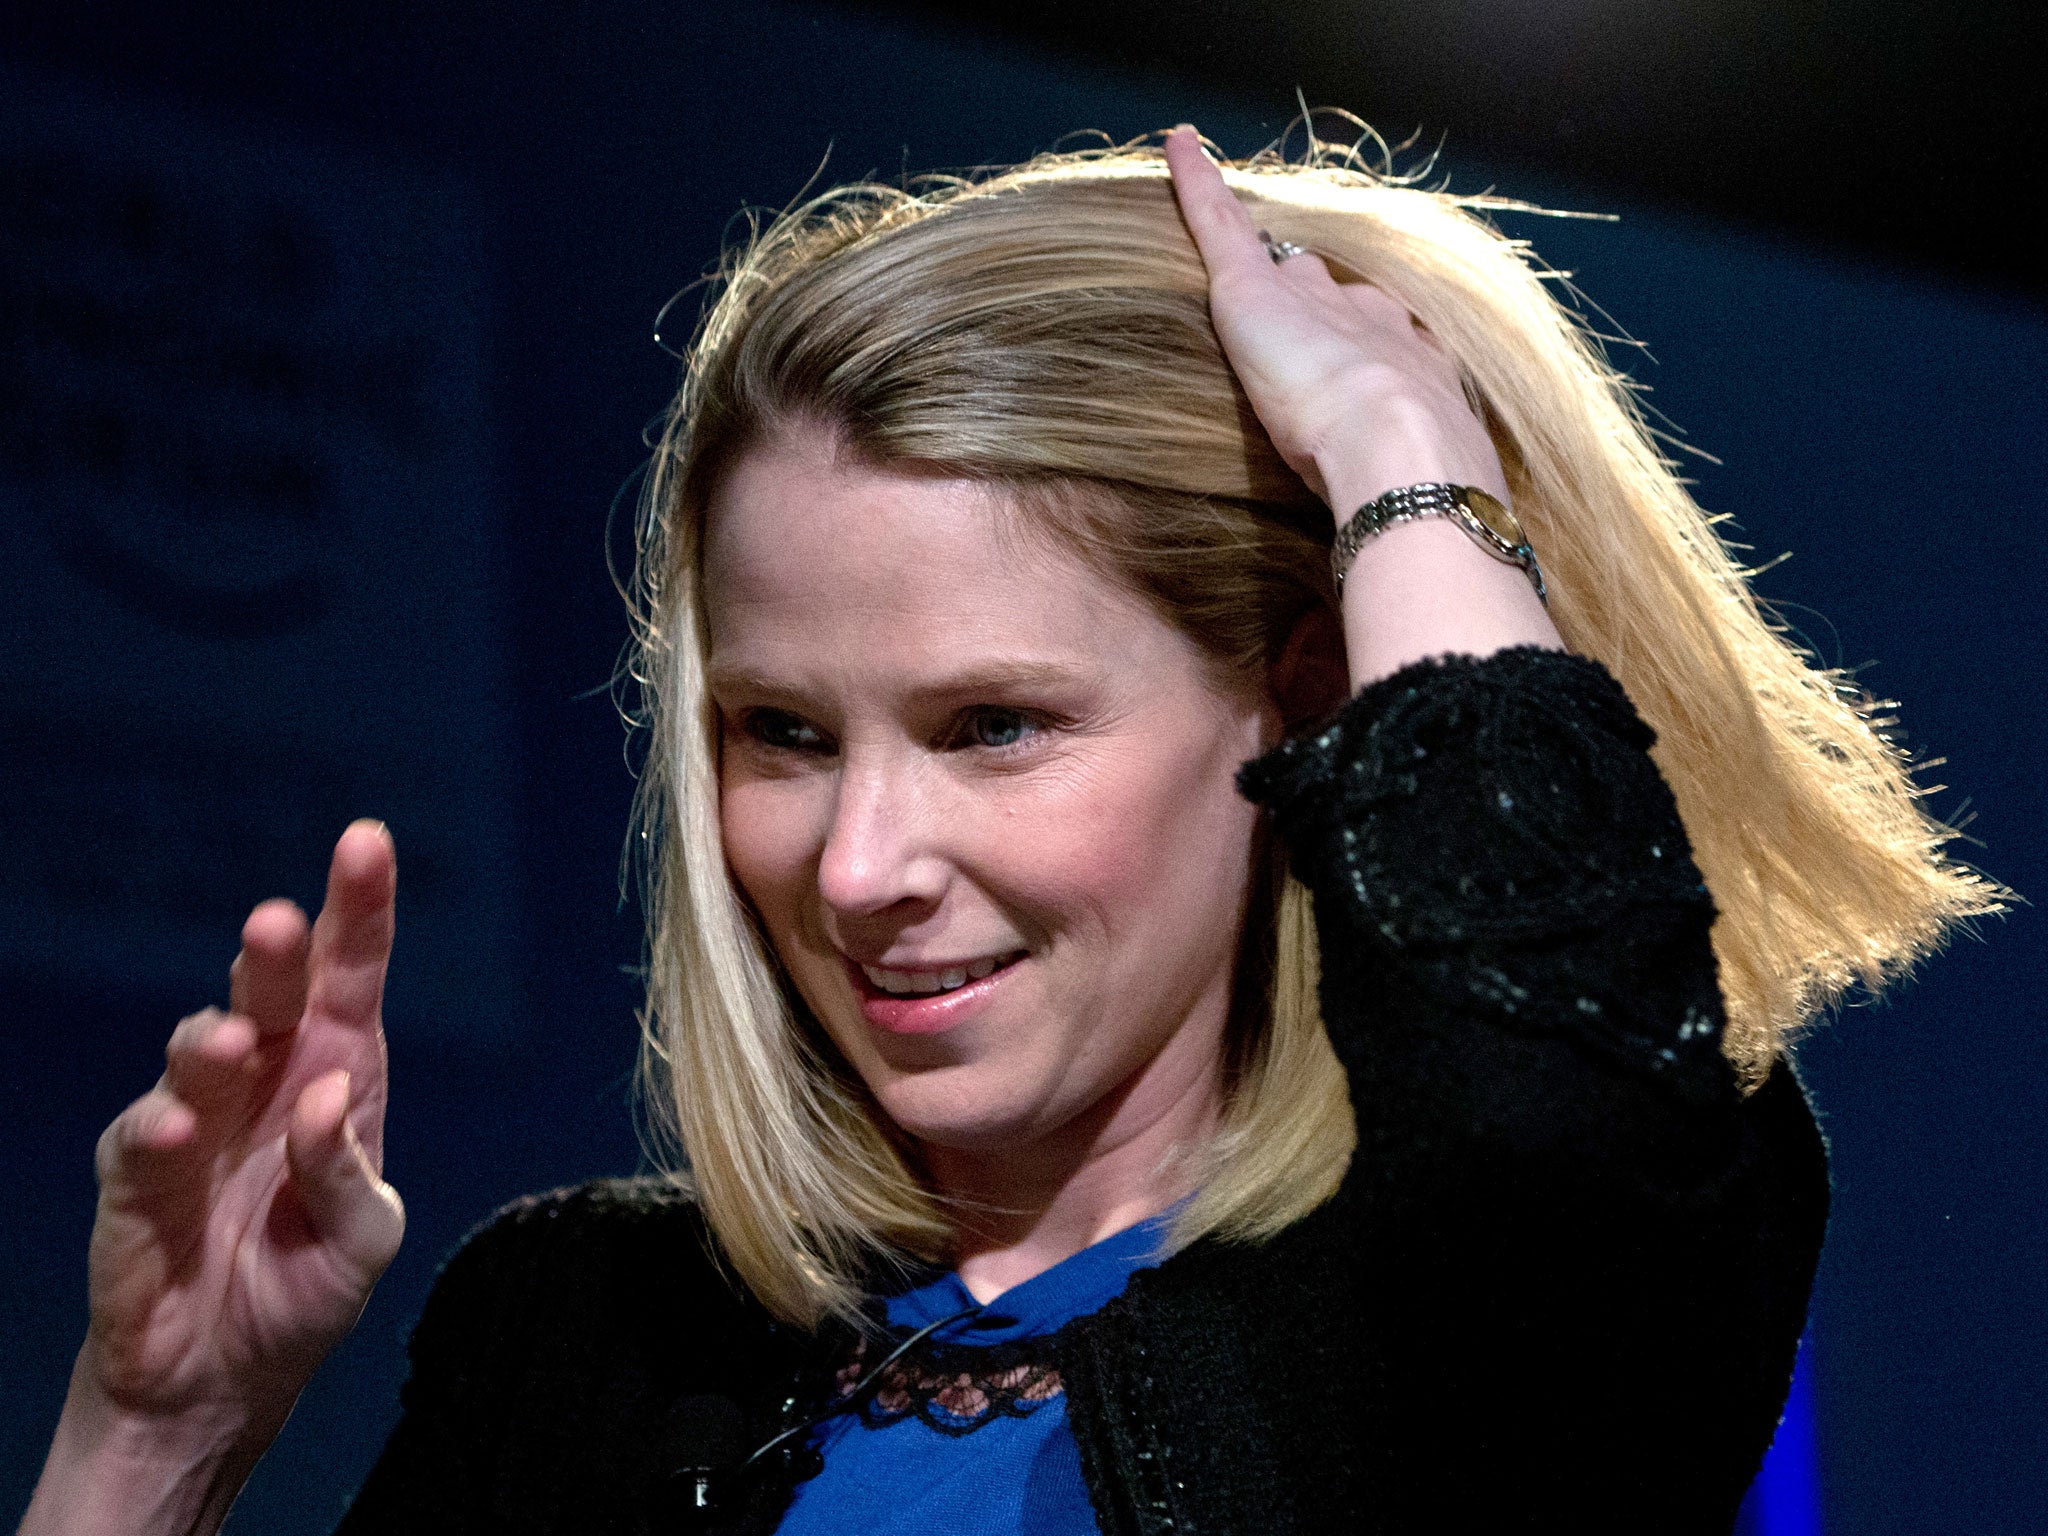 Marissa Mayer, CEO of Yahoo!, attends a session of the World Economic Forum 2013 Annual Meeting on January 25, 2013 at the Swiss resort of Davos.